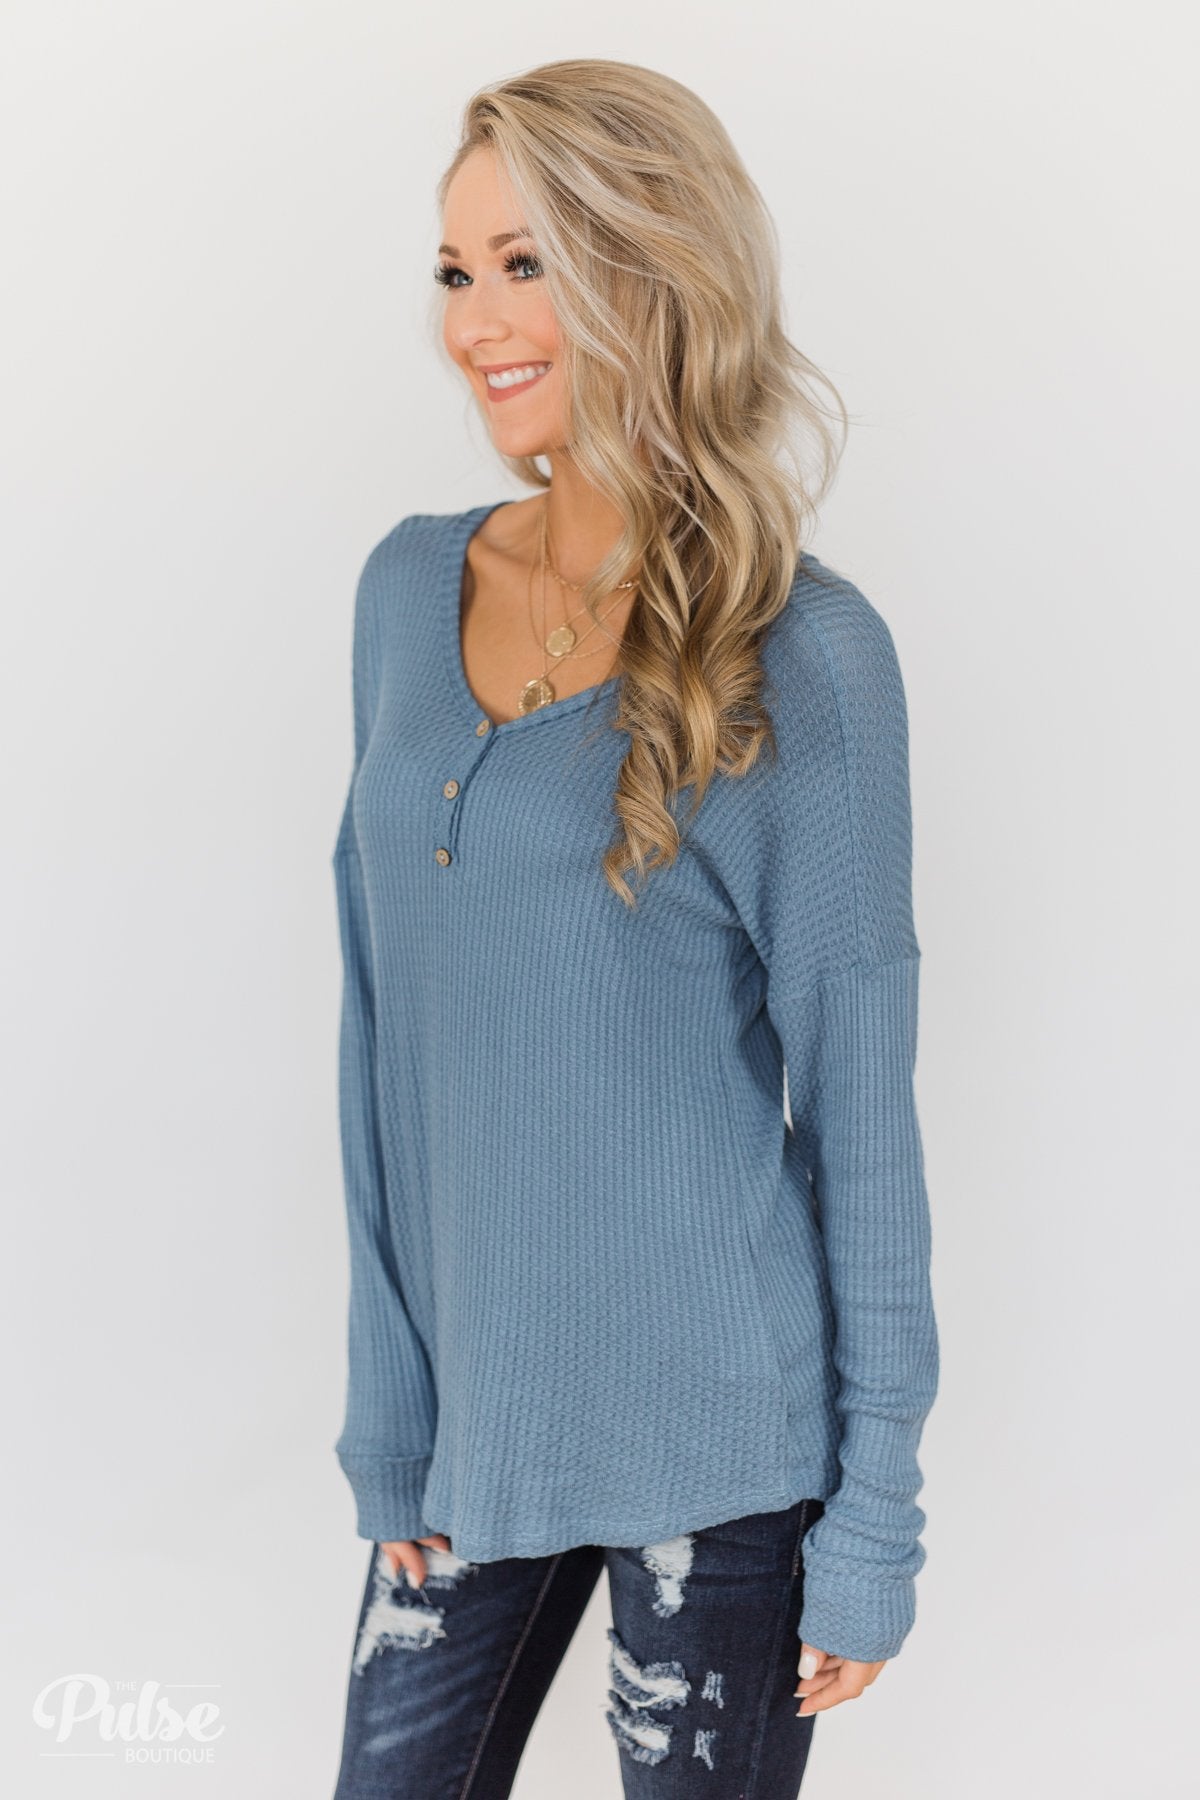 Knowing You V-Neck Thermal Top- Slate Blue – The Pulse Boutique